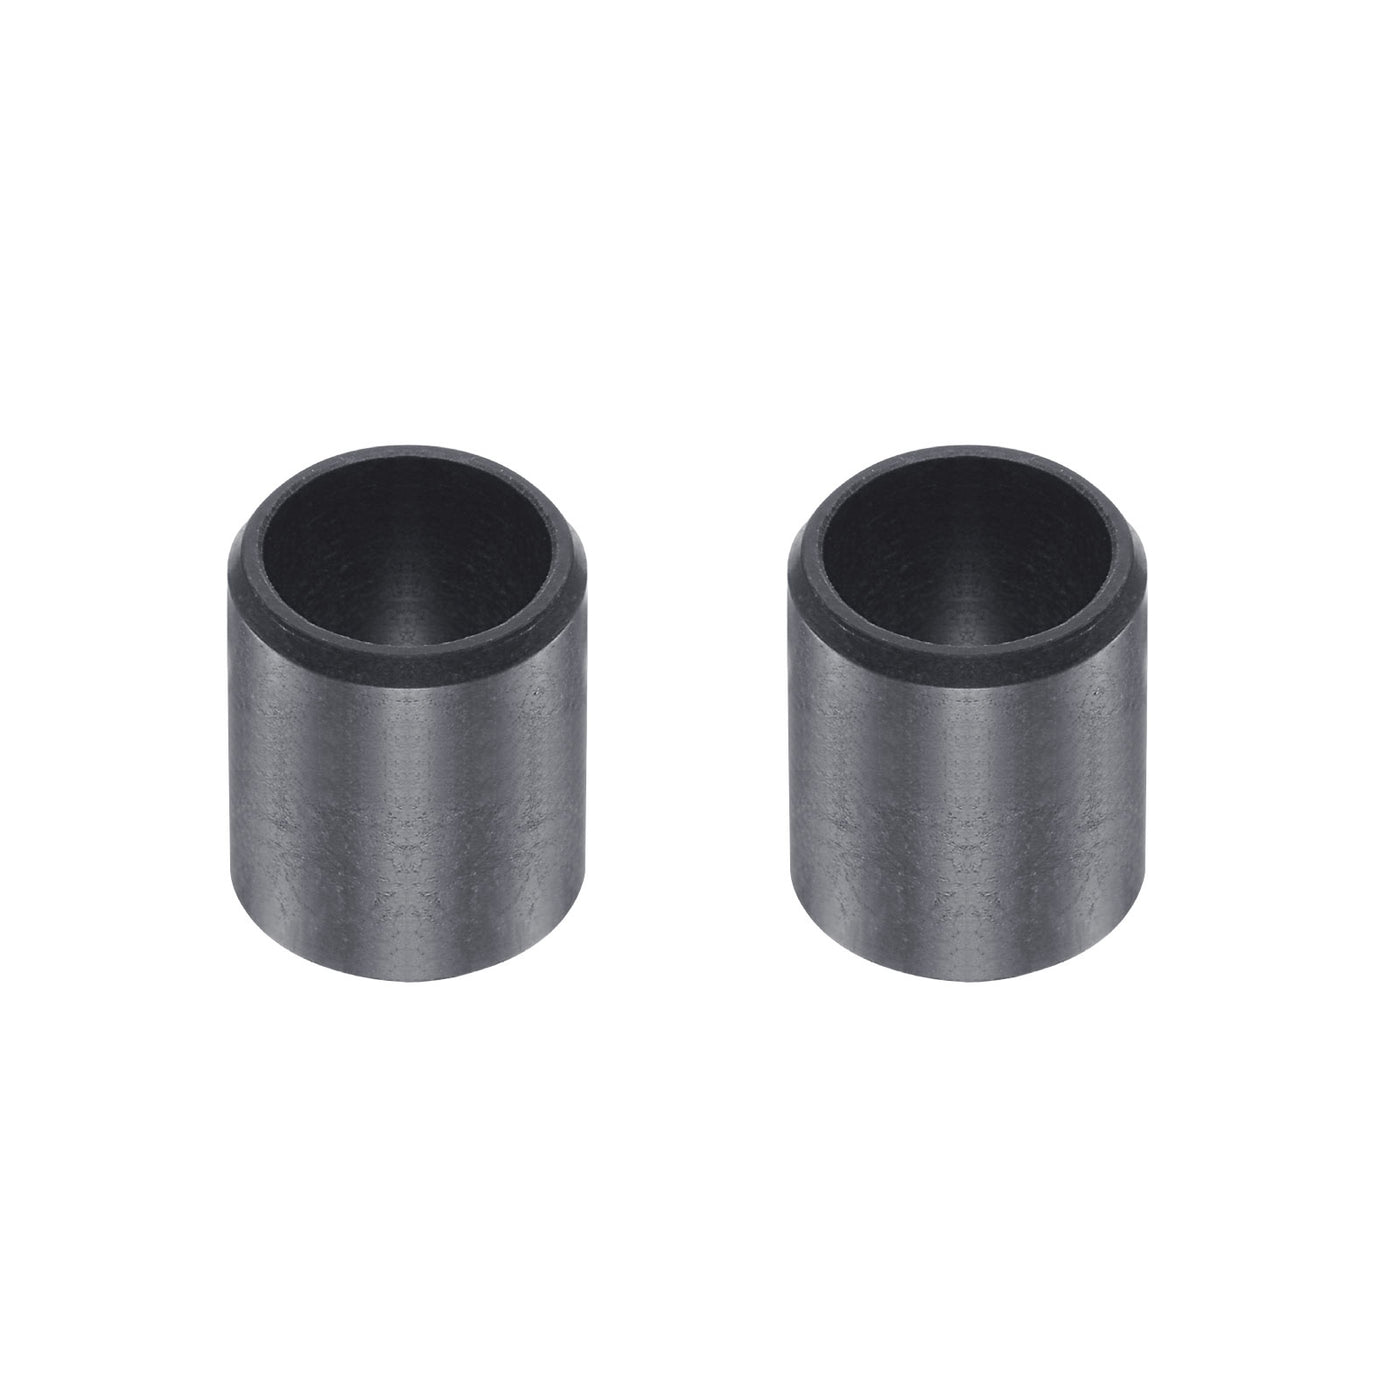 uxcell Uxcell Sleeve Bearings 8mmx10mmx12mm POM Wrapped Oilless Bushings Black 2pcs